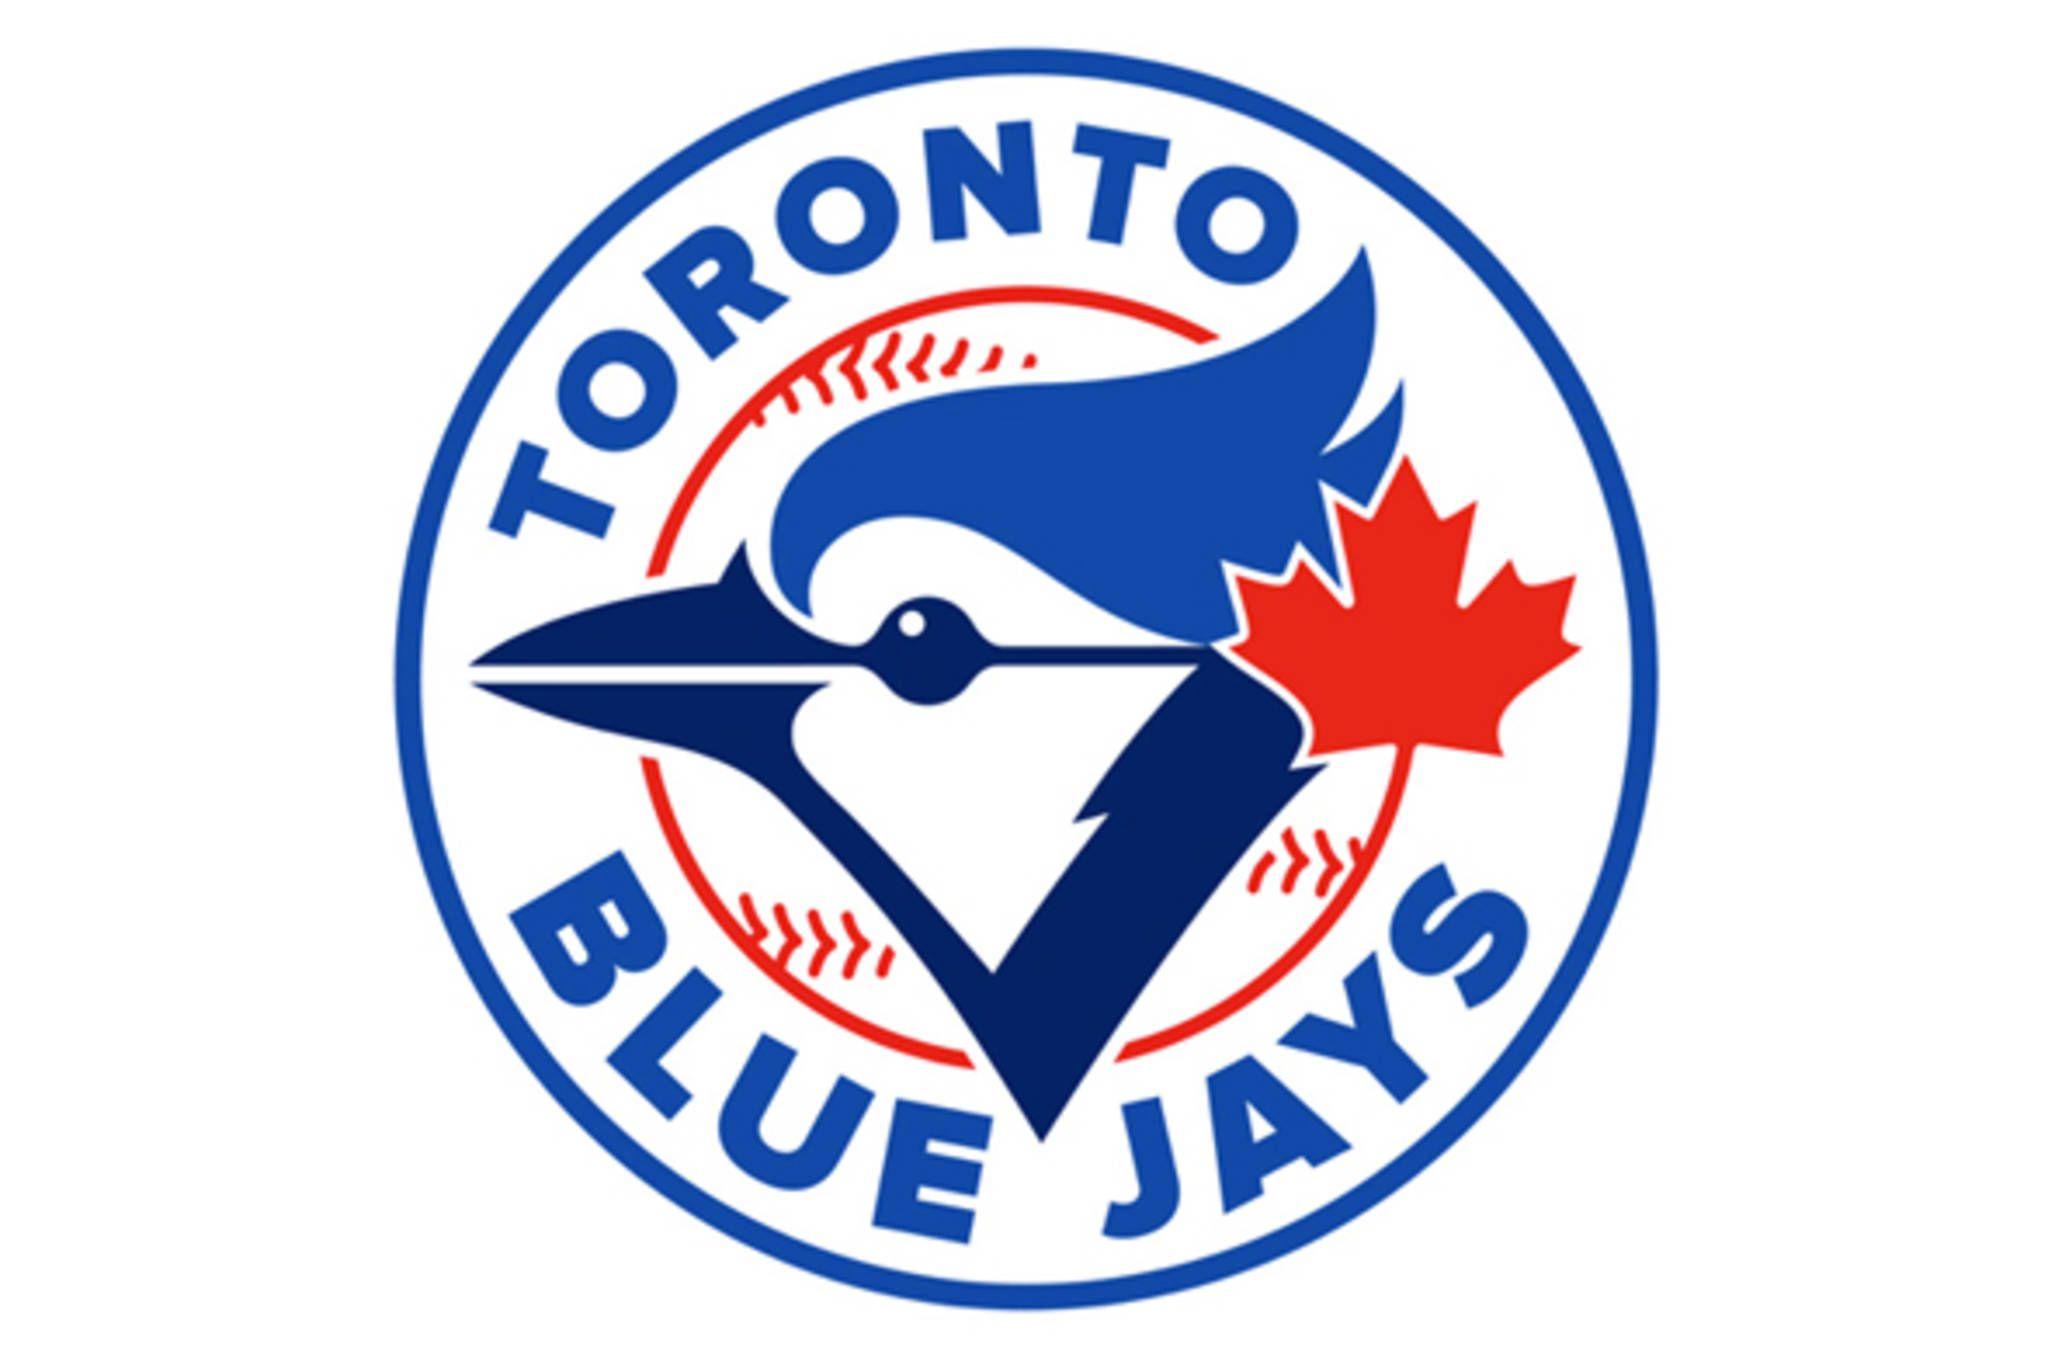 Toronto Blue Jays Logo - Is this an even better Toronto Blue Jays logo?